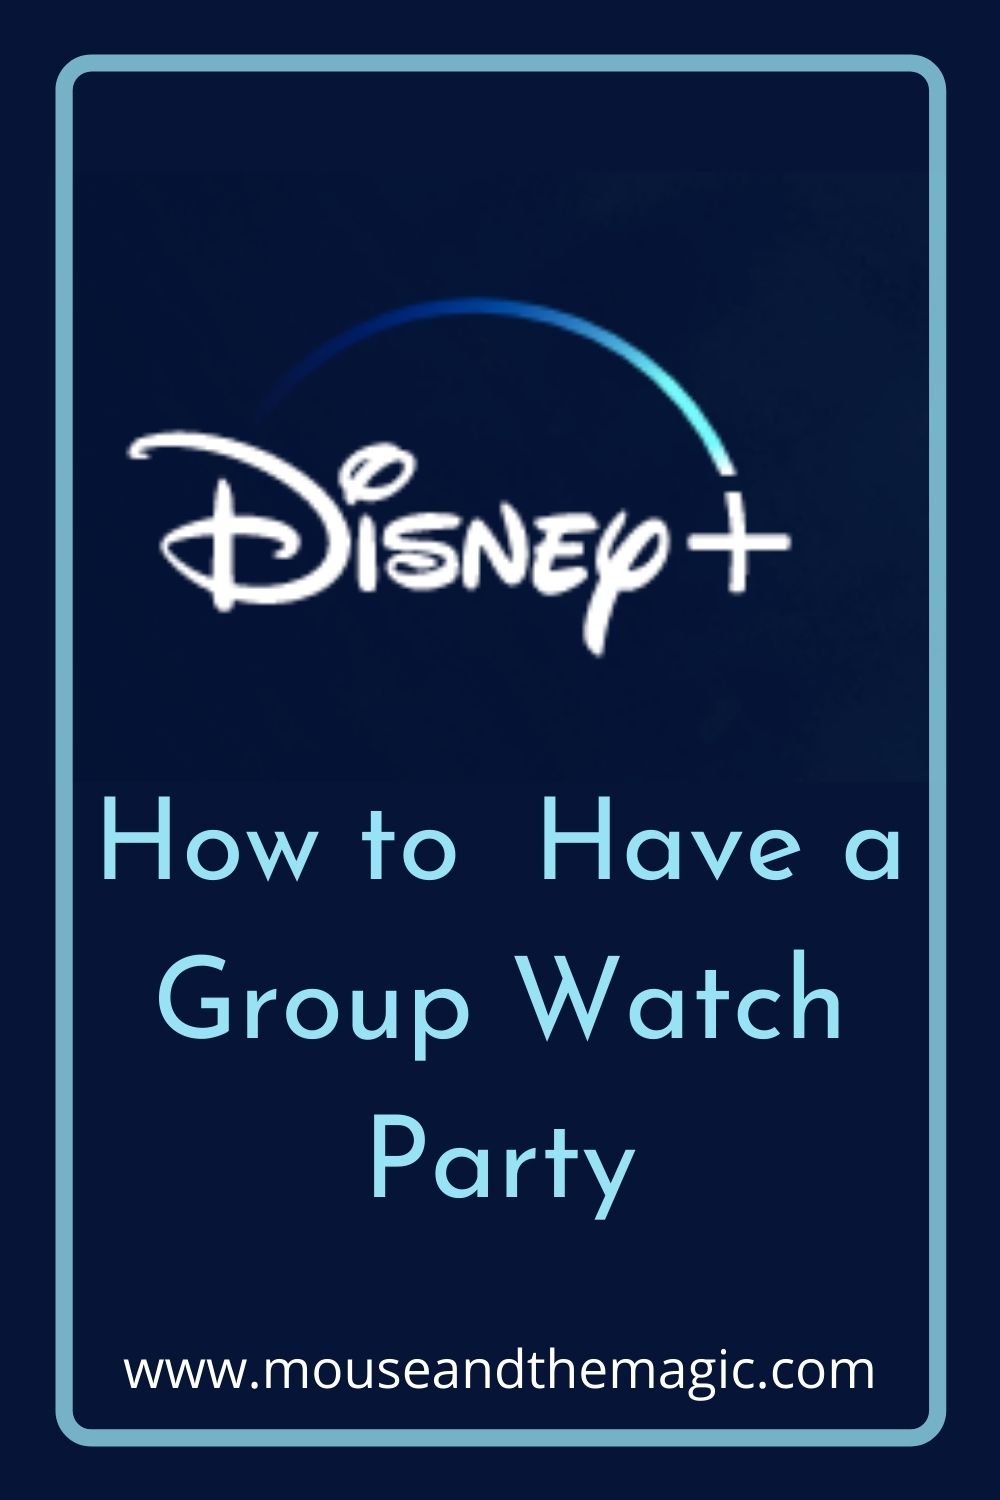 How to Host a Disney Plus Group Watch Party